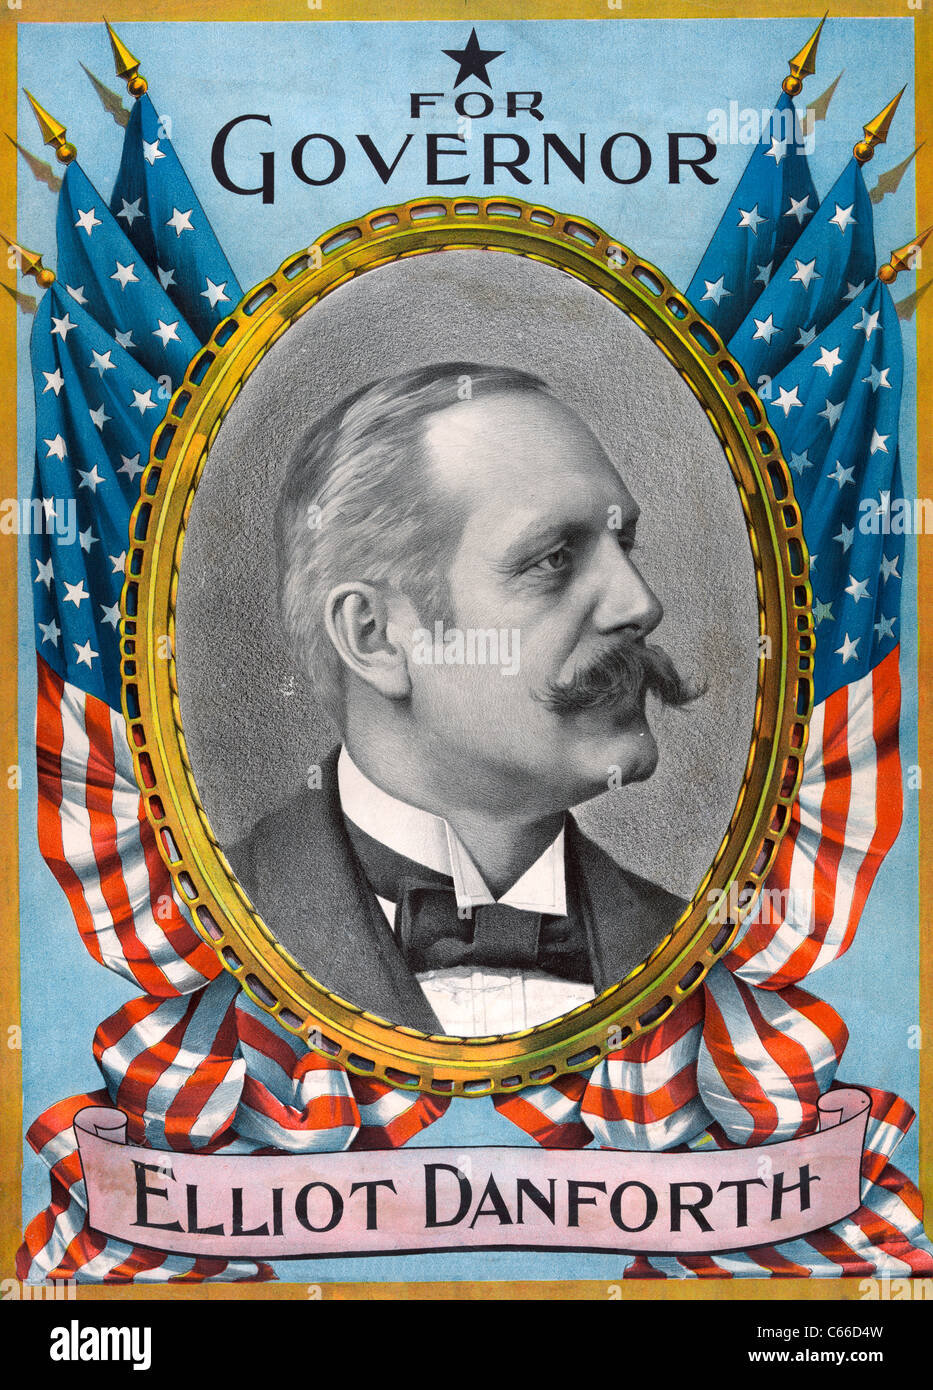 For Governor Elliot Danforth, New York, 1898 Campaign Poster Stock Photo